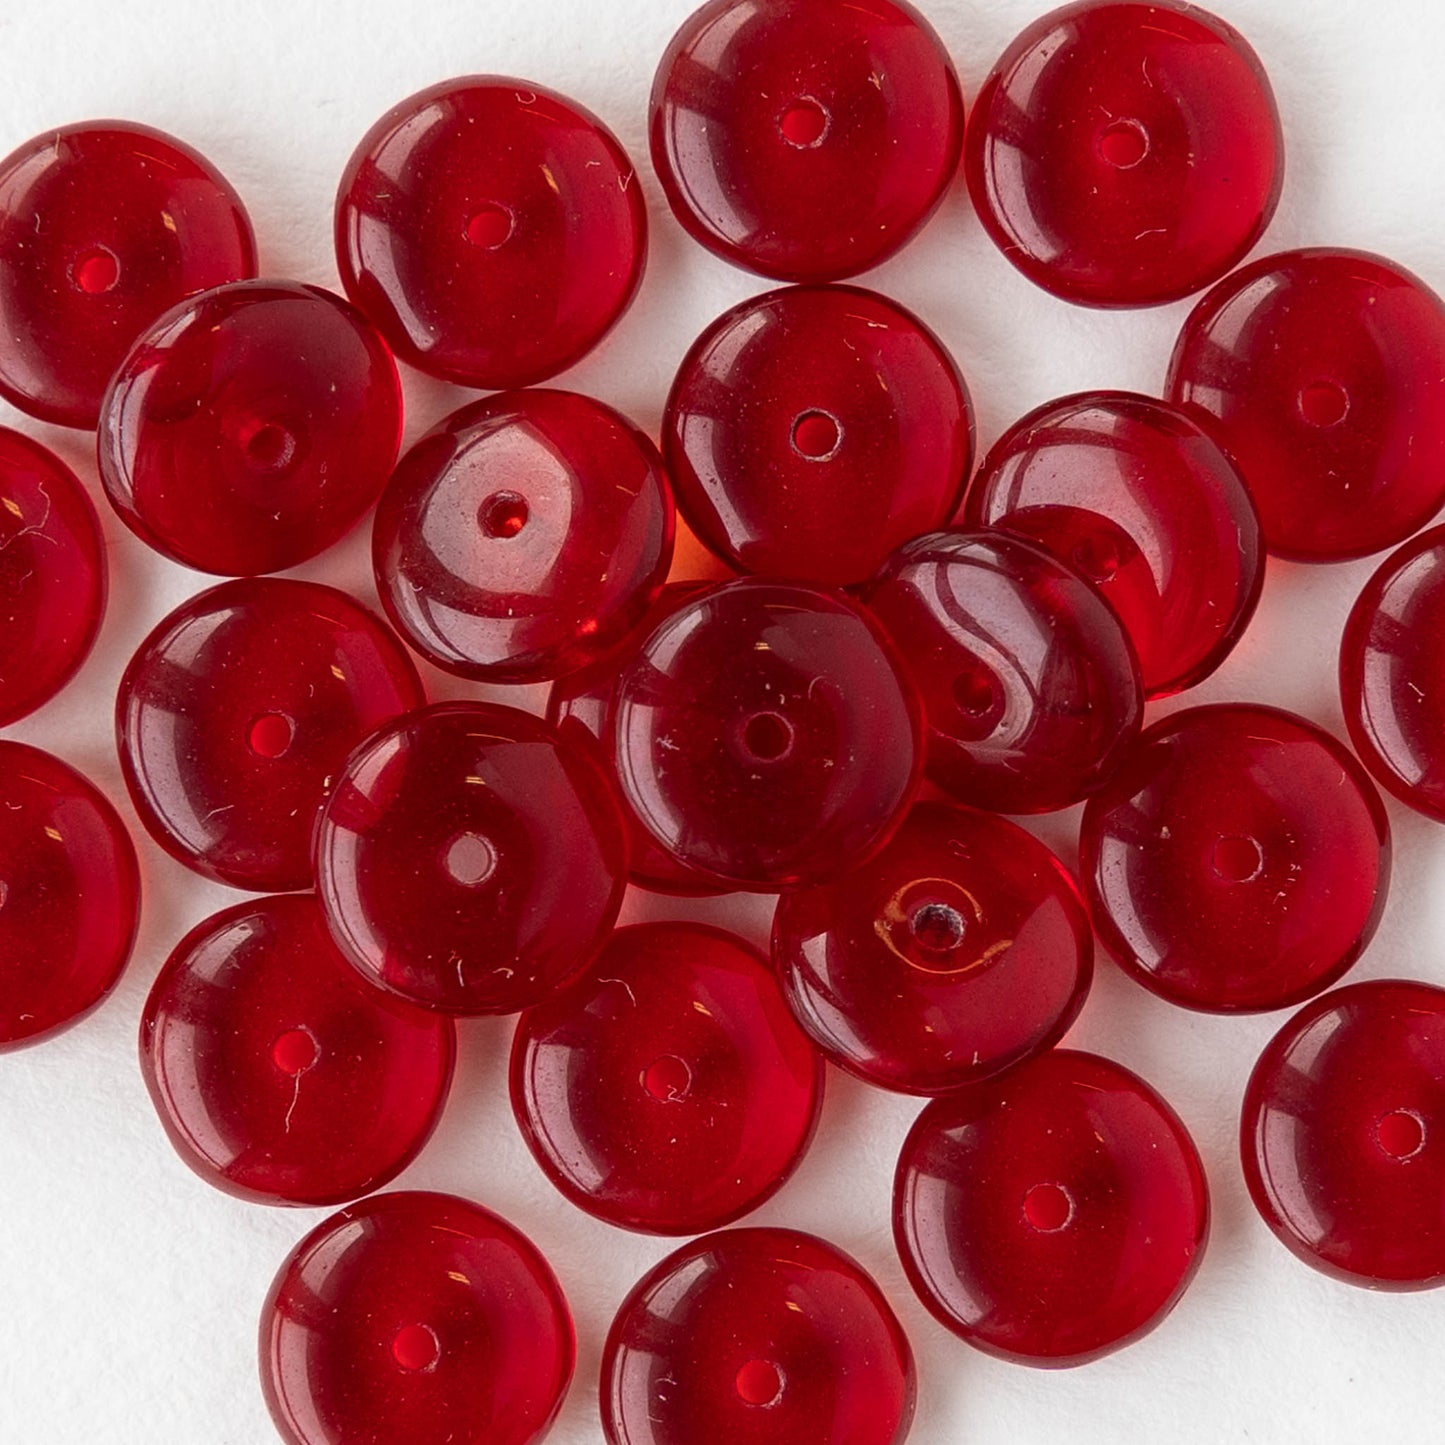 8mm Glass Rondelle Beads - Red - 30 Beads